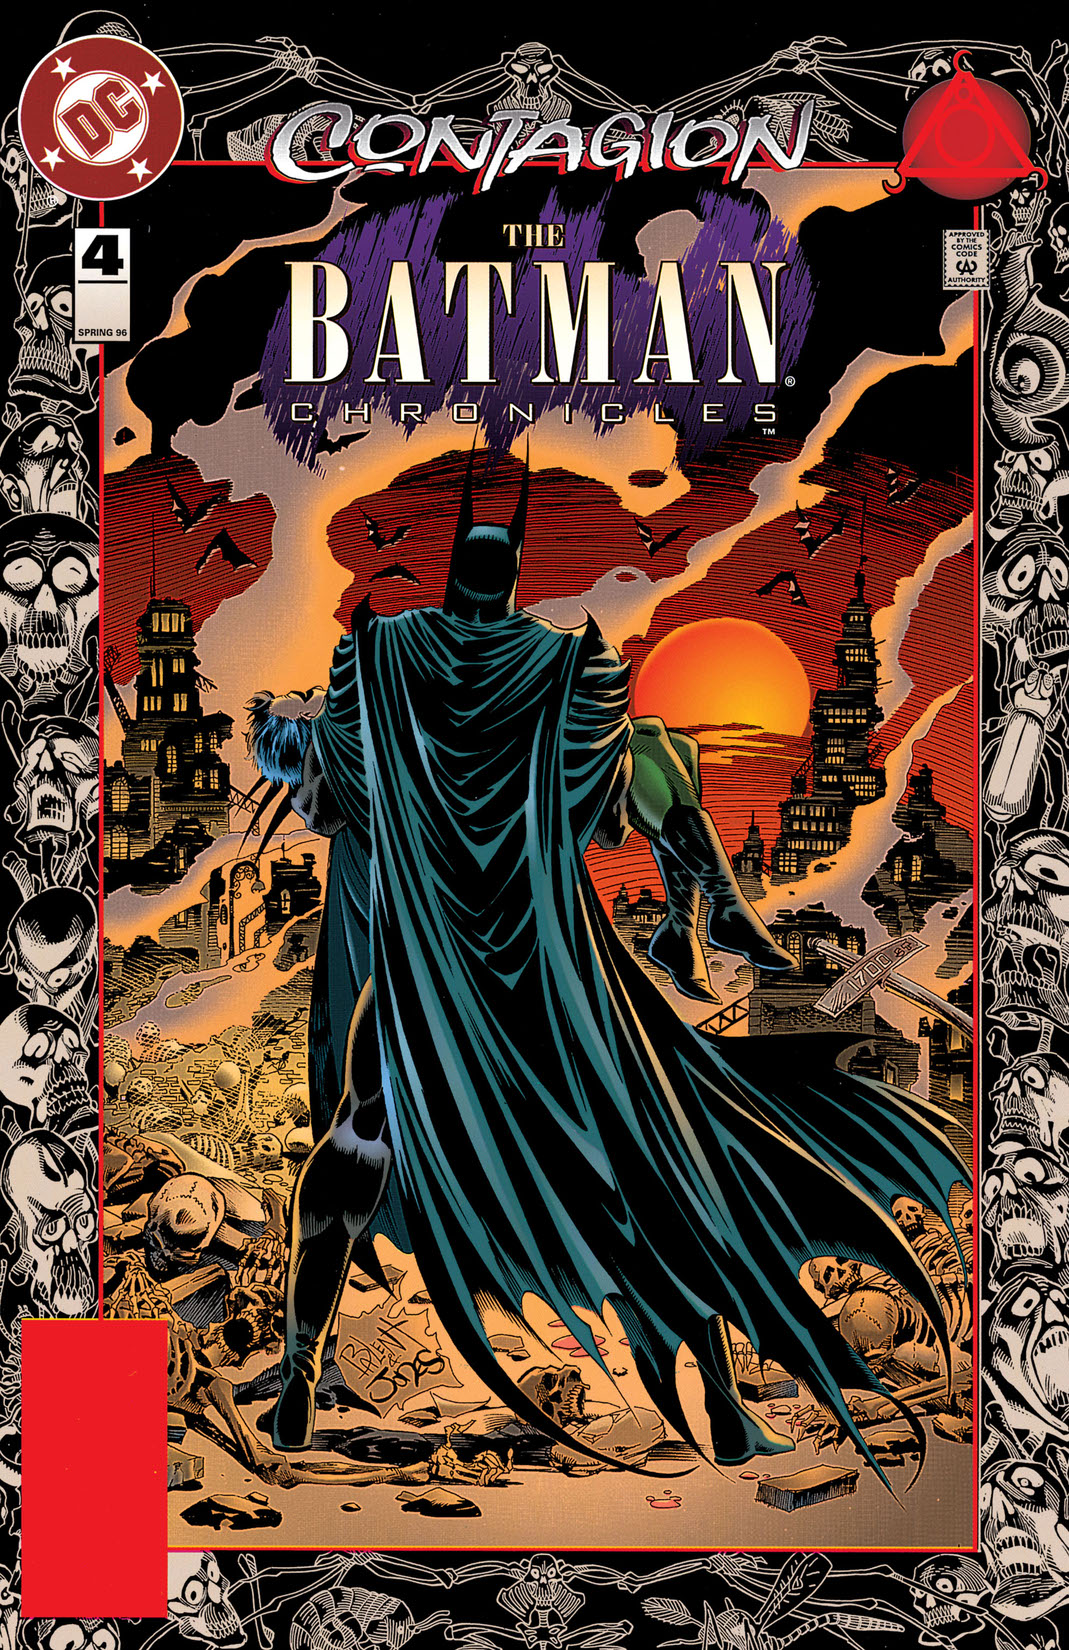 The Batman Chronicles #4 preview images